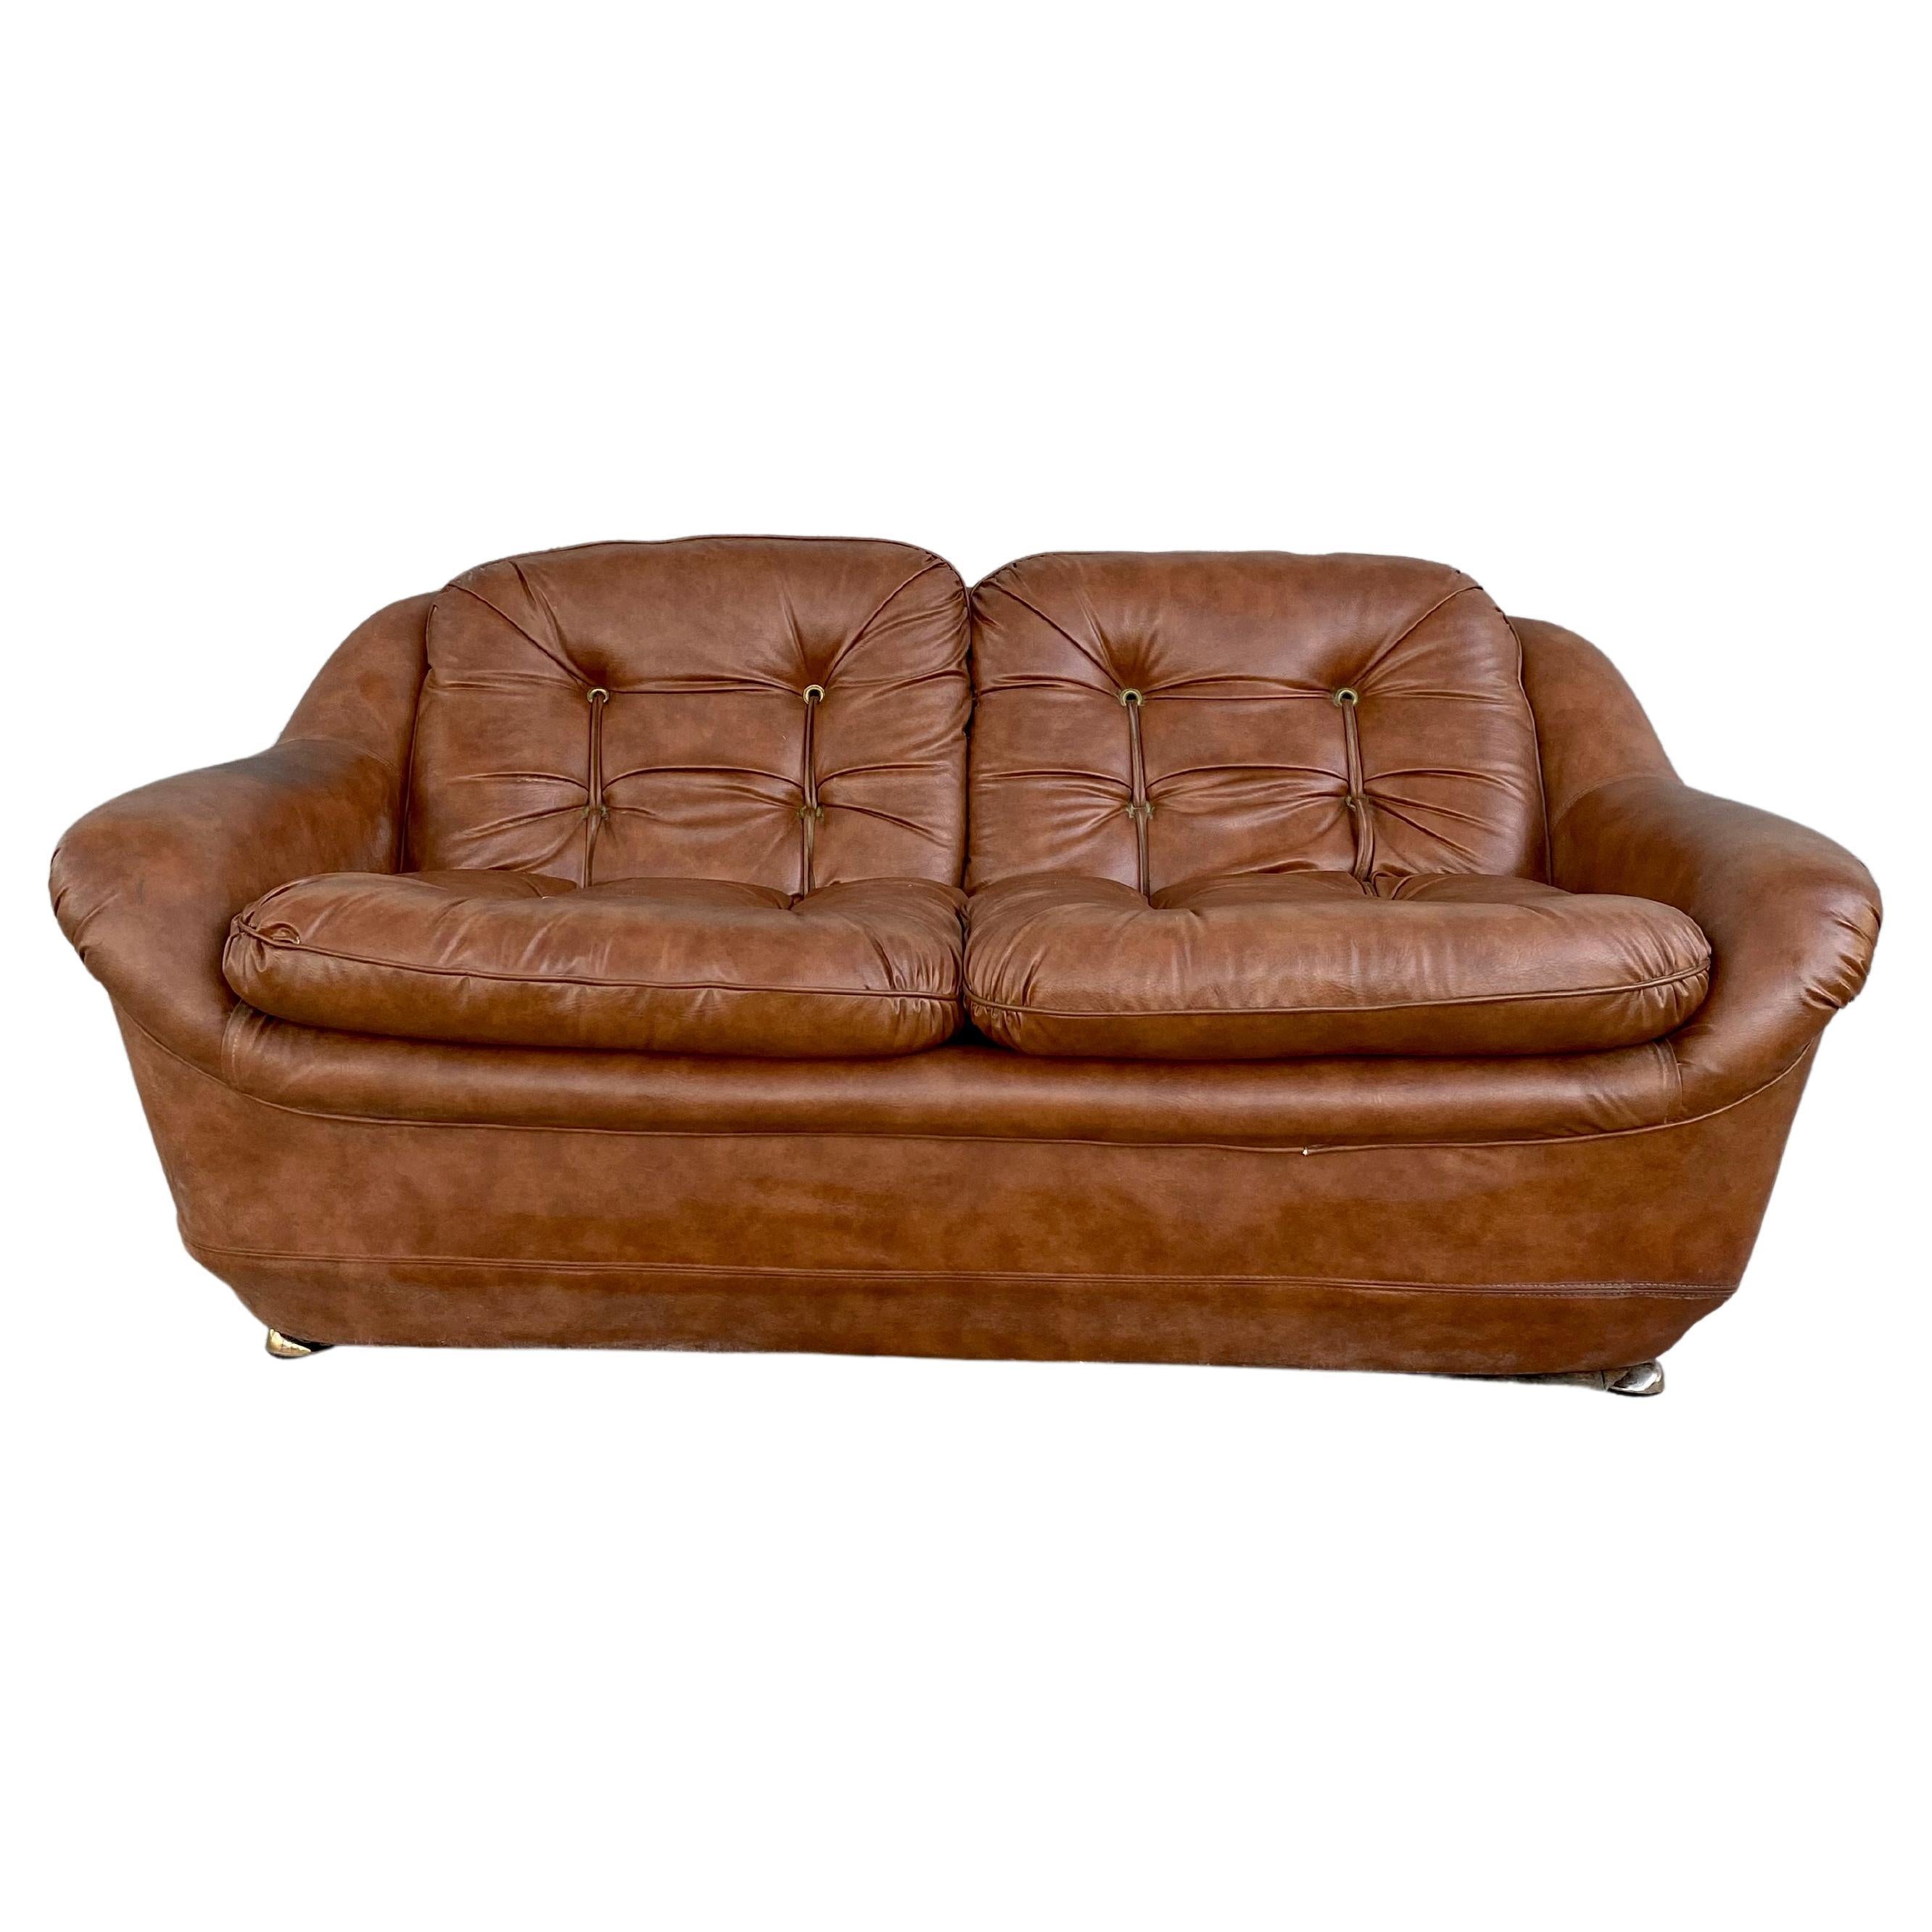 1970s Space Age Baseball Glove Curved Sofa Loveseat For Sale